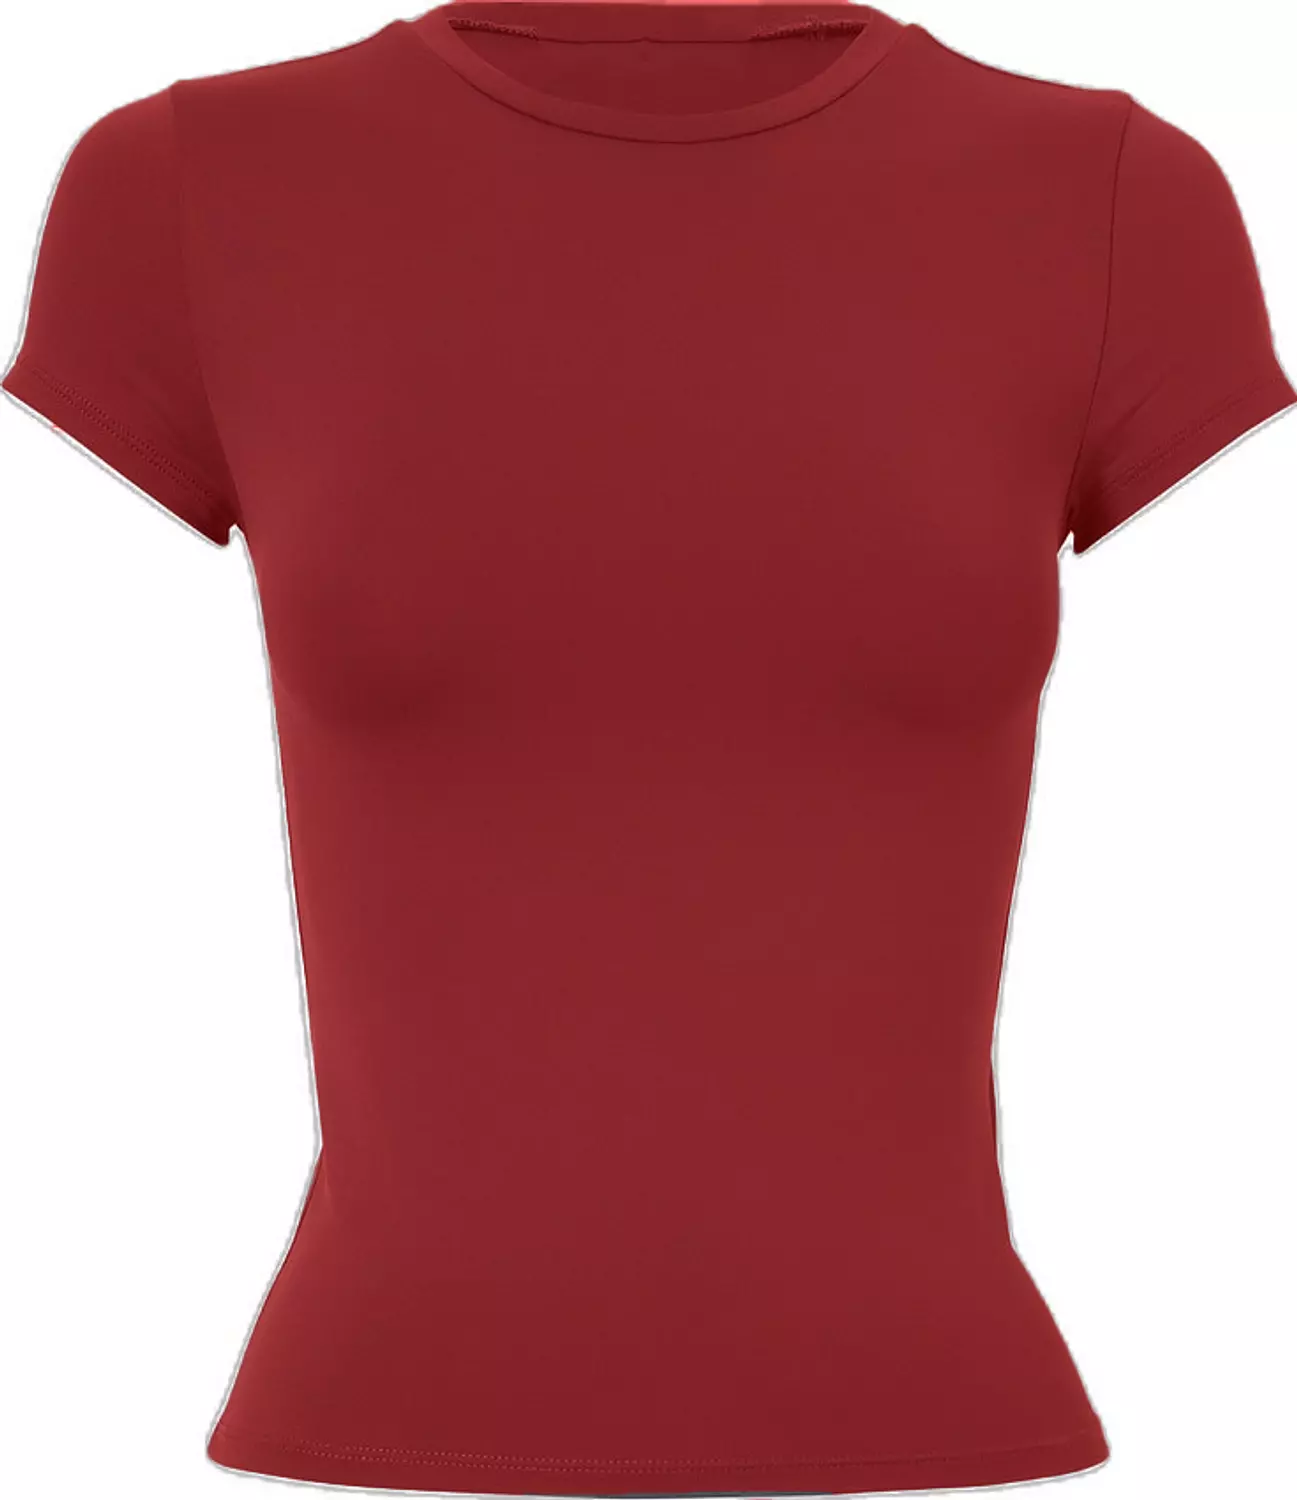 Red Basic Top hover image